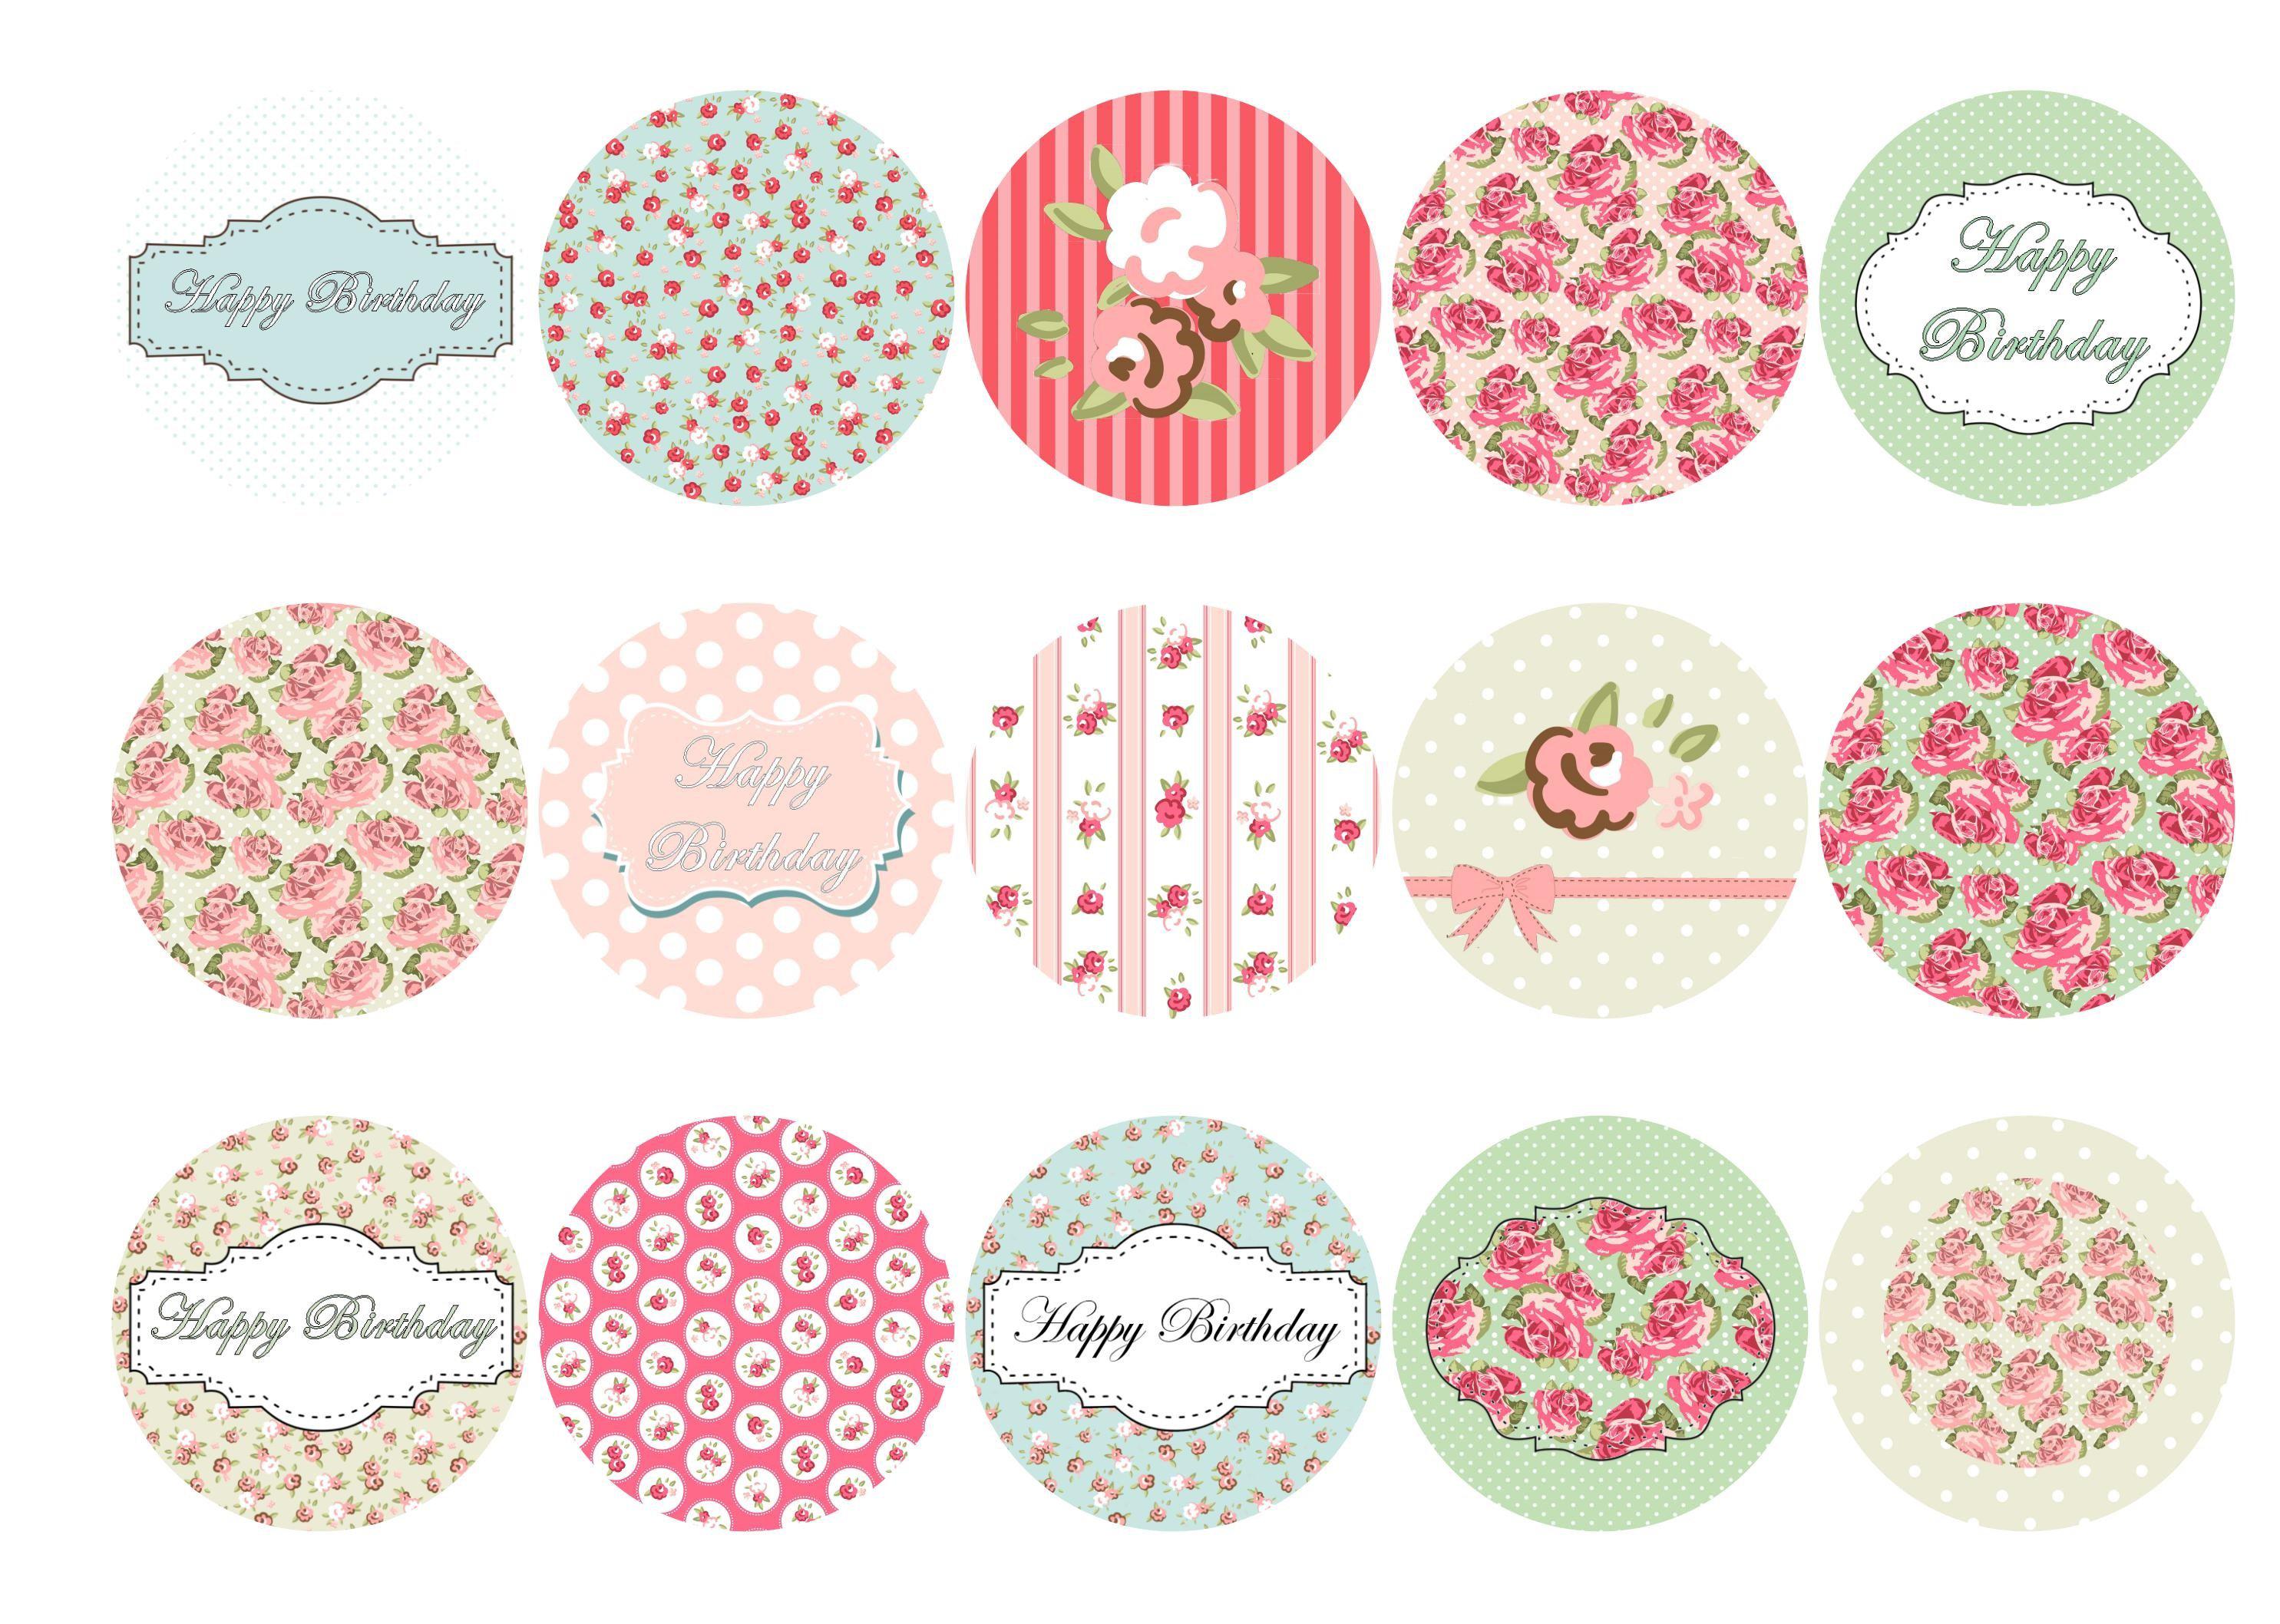 15 printed cupcake toppers with happy birthday designs